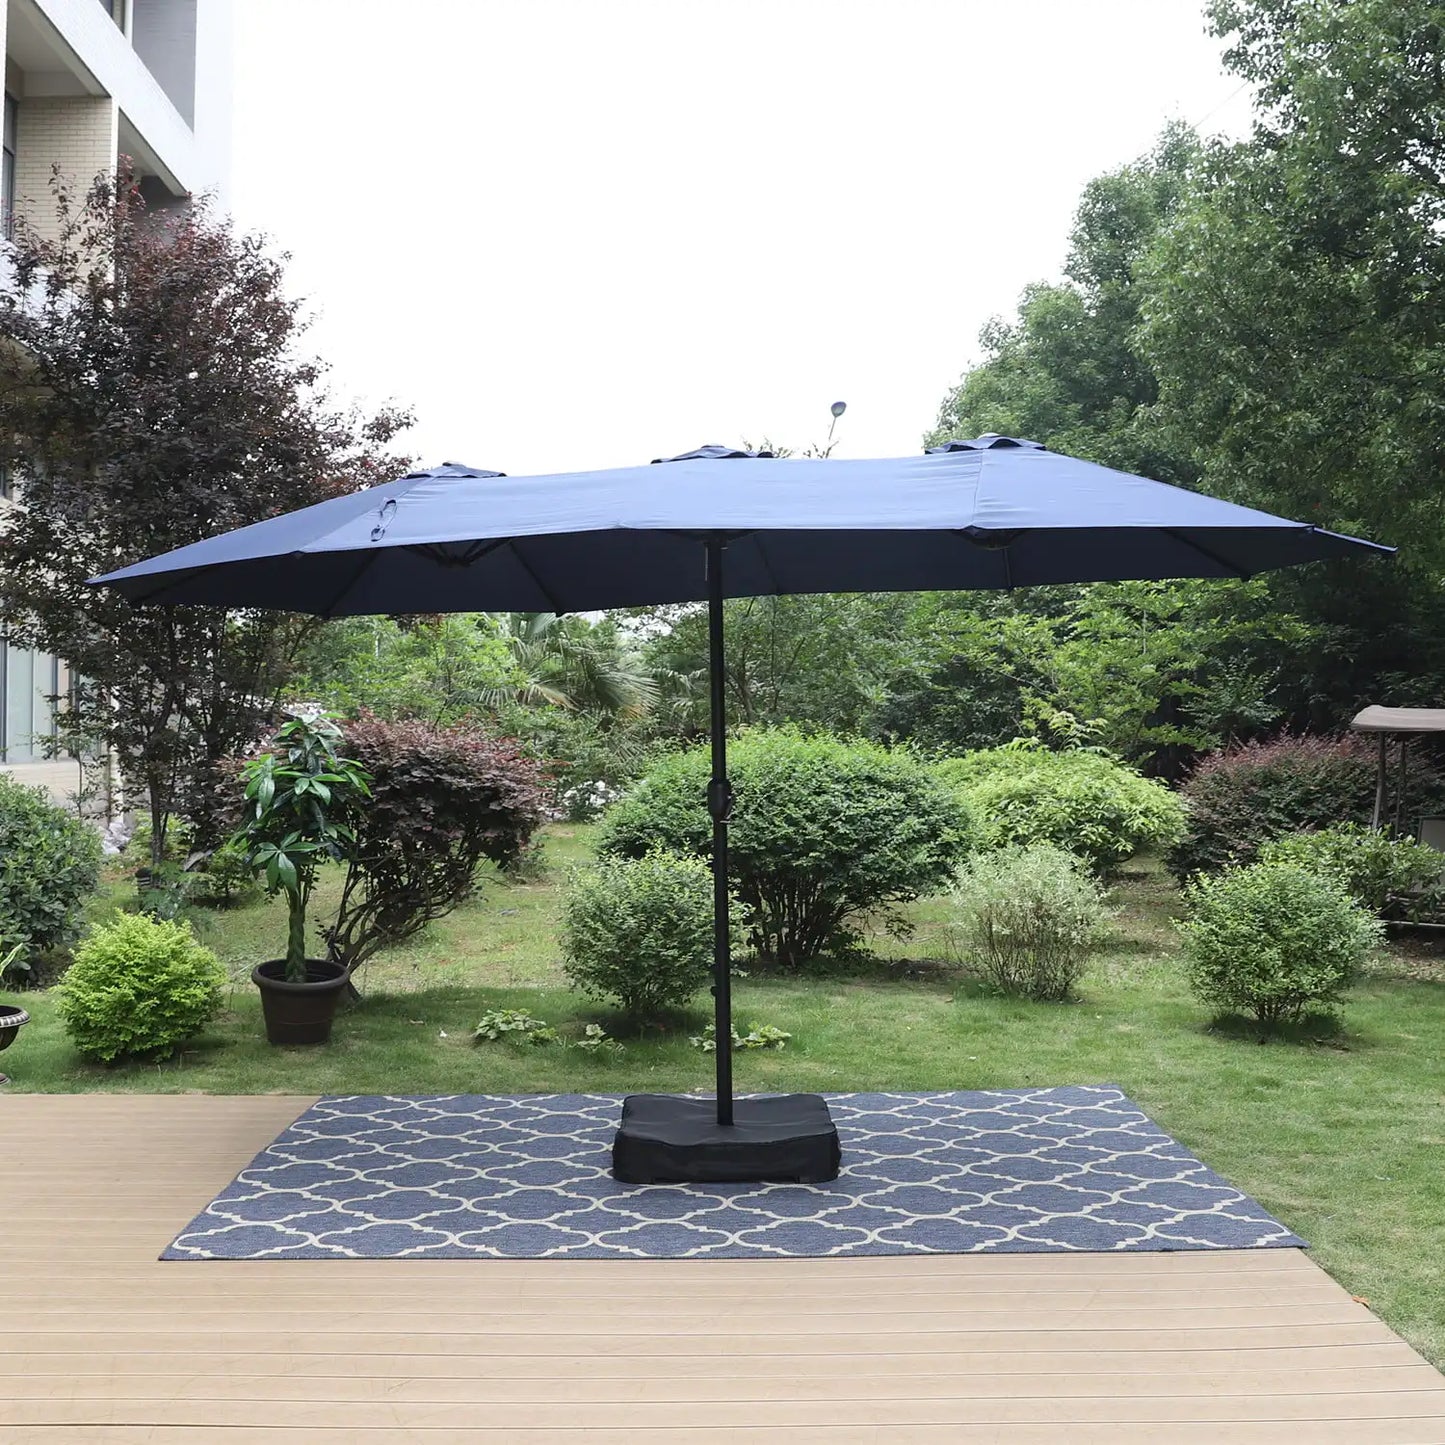 15ft Double-Sided Patio Umbrella with Base Large Outdoor Table